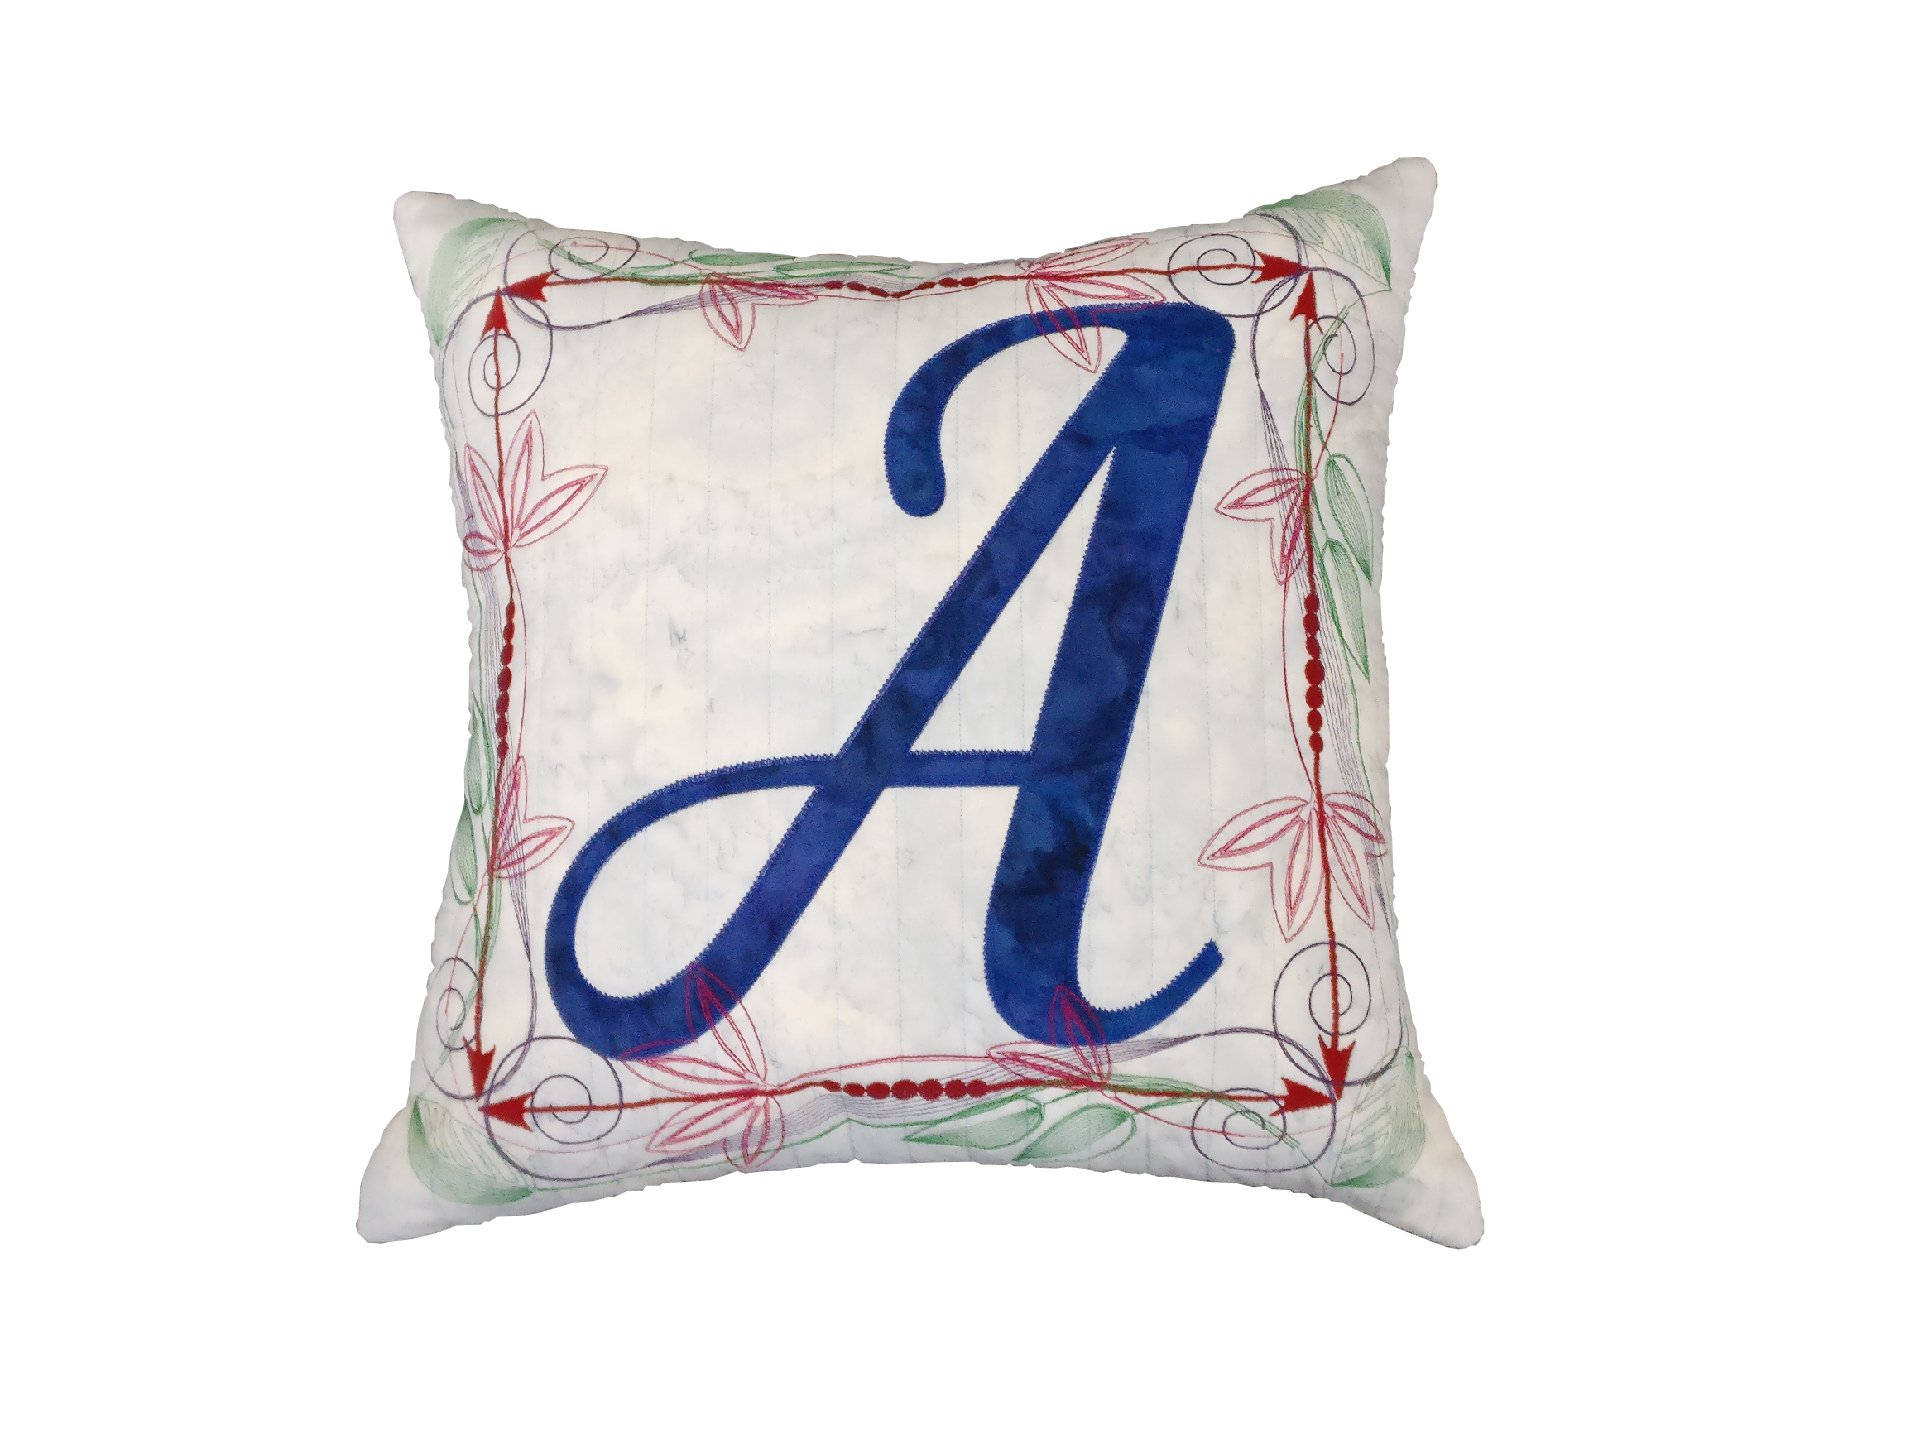 Monogram Patterns For Embroidery Jbkga Monogram Pillow Quilting And Embroidery Patterns